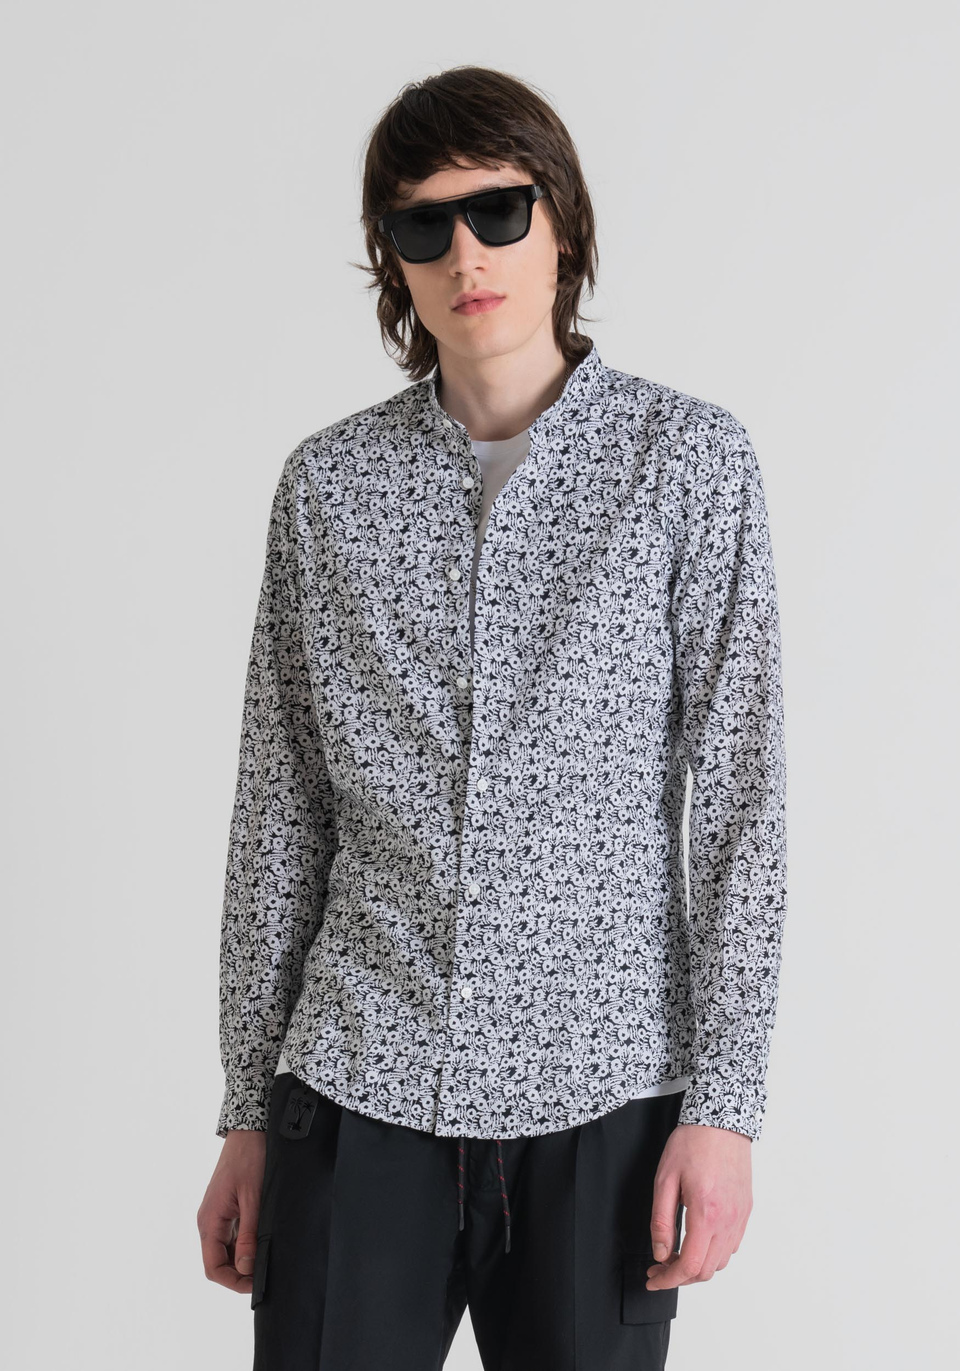 “SEOUL” SLIM FIT SHIRT IN PURE COTTON WITH FLORAL MICROPATTERN - Antony Morato Online Shop